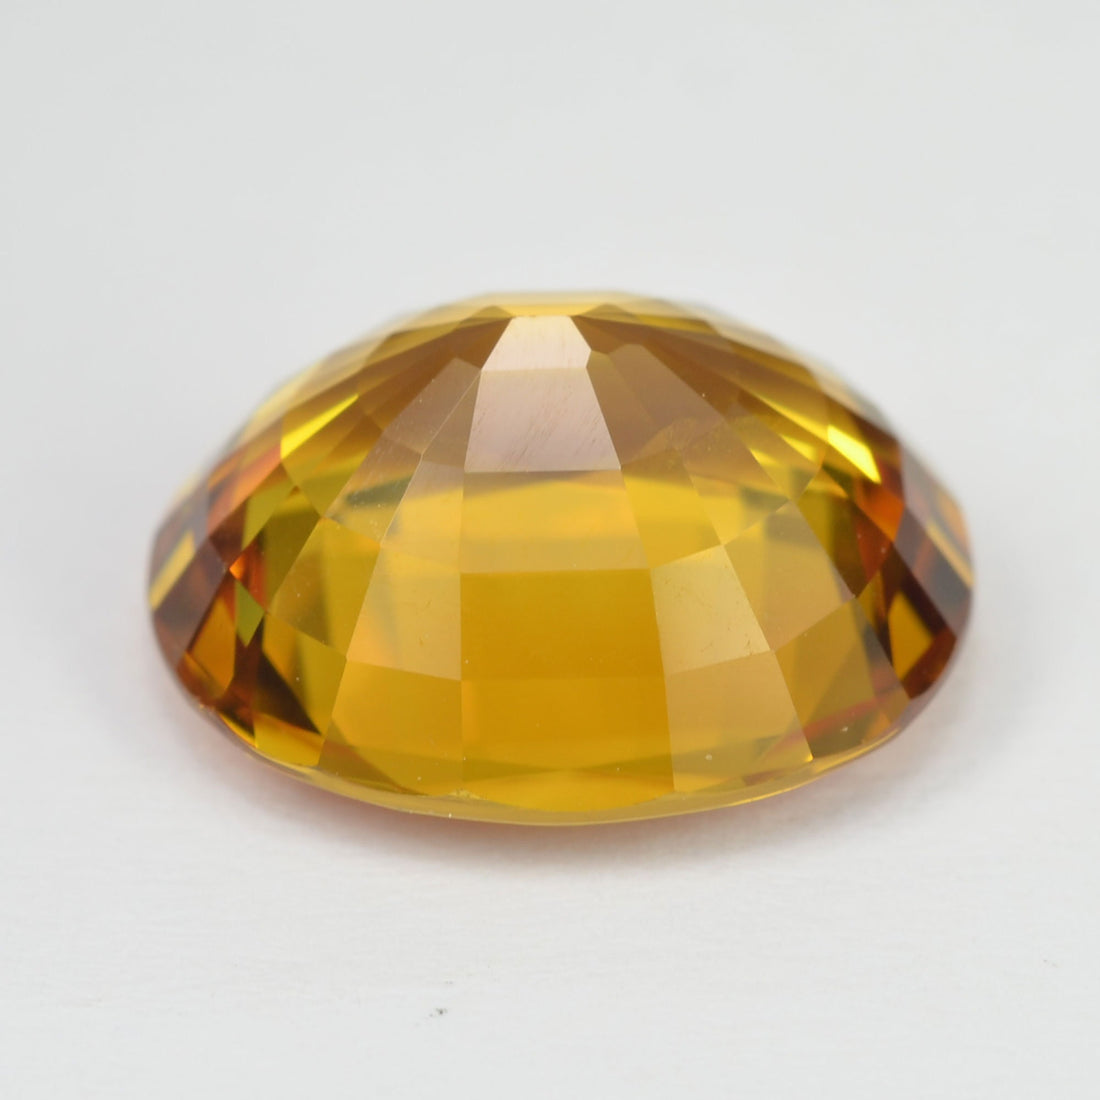 5.08 cts Natural Yellow Sapphire Loose Gemstone Oval Cut